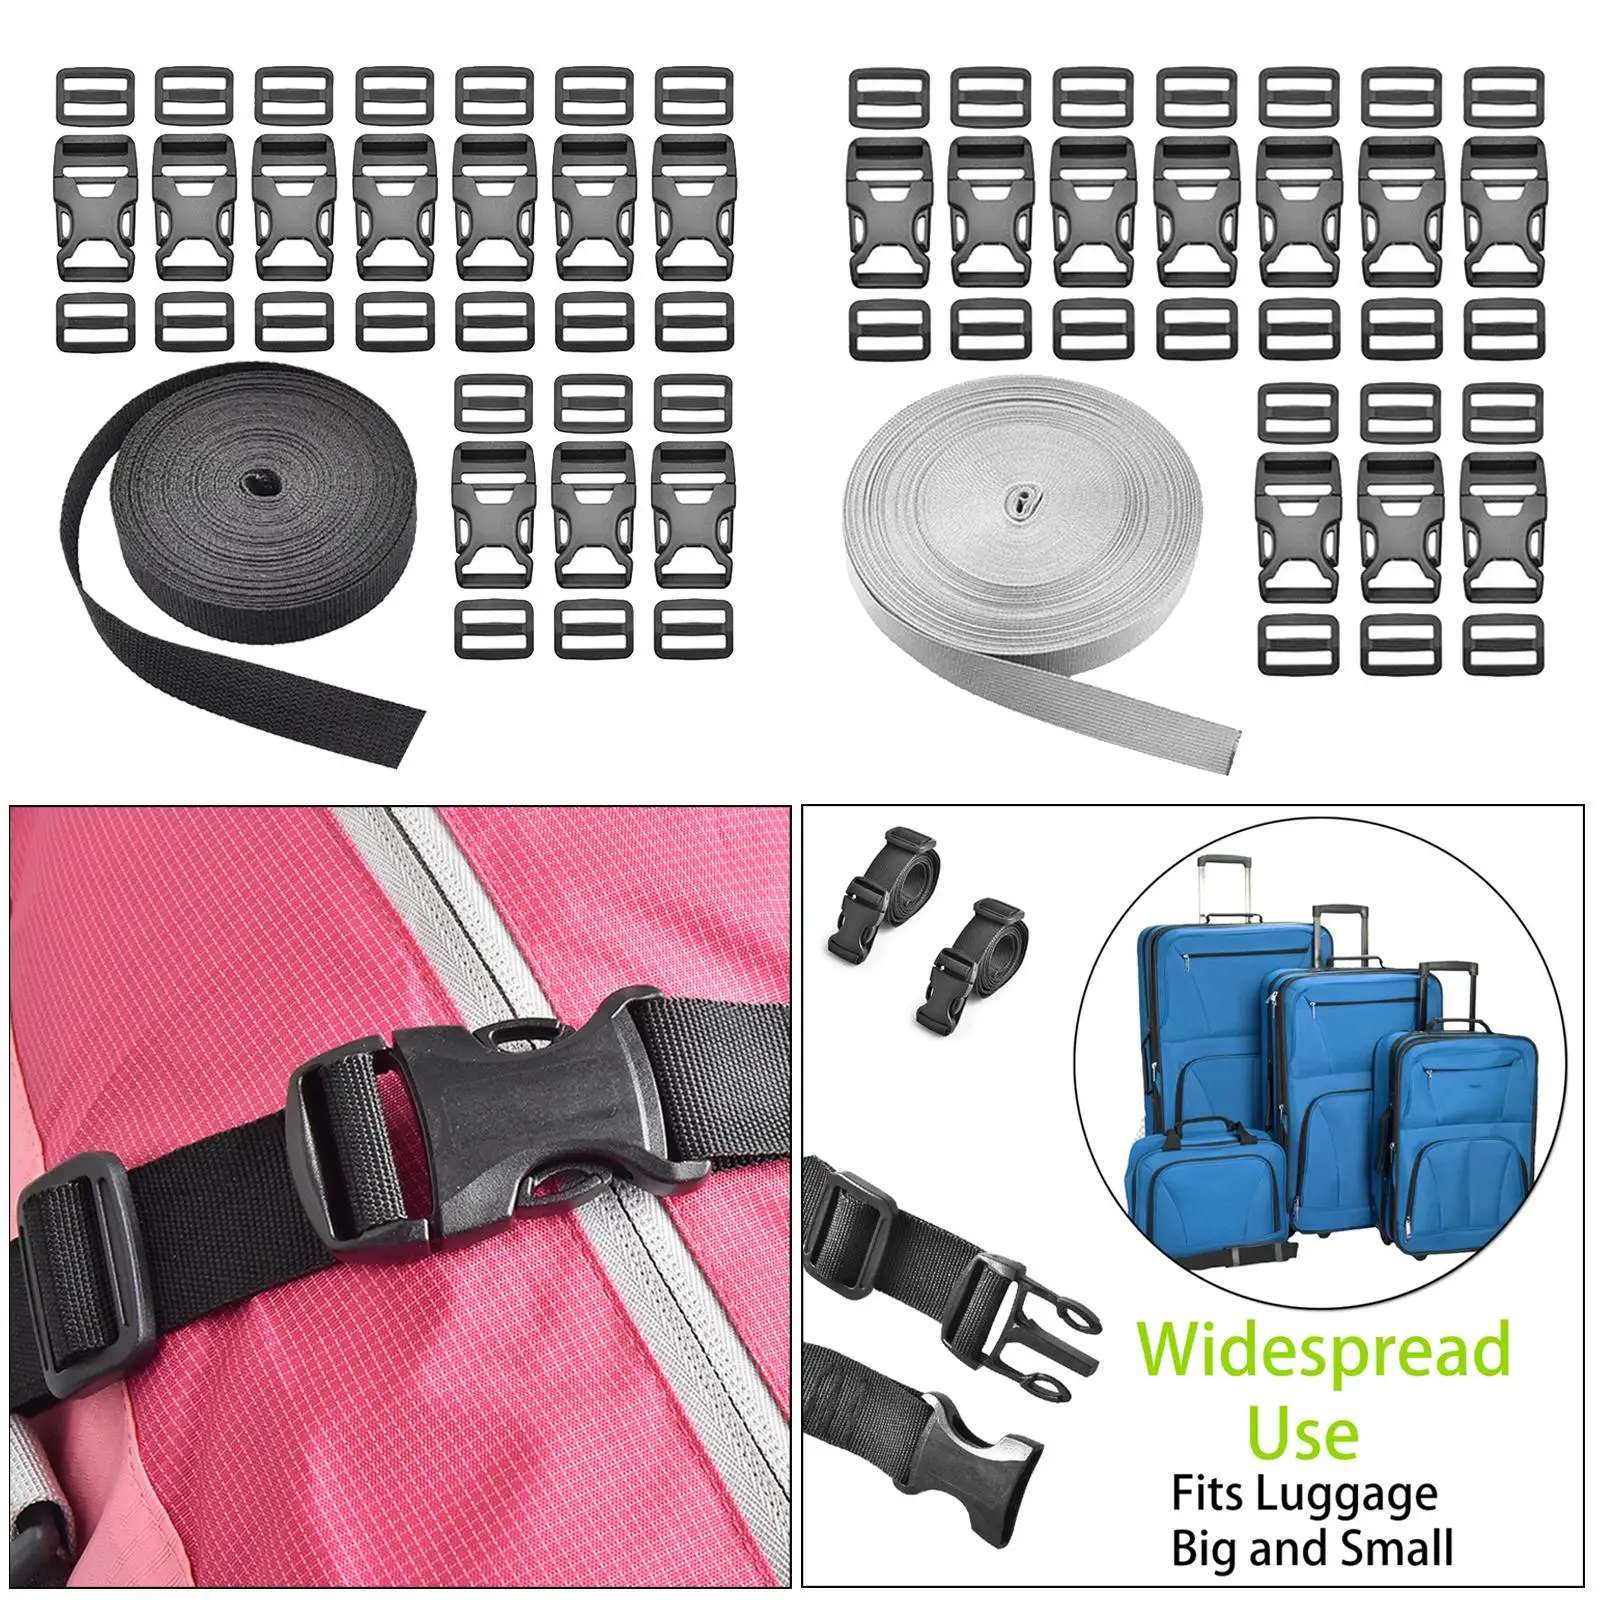 Lashing Strap, Buckle tie Straps Heavy Duty for , Luggage, Bicycle, Camping Hiking Suitcase Luggage Lashing Straps